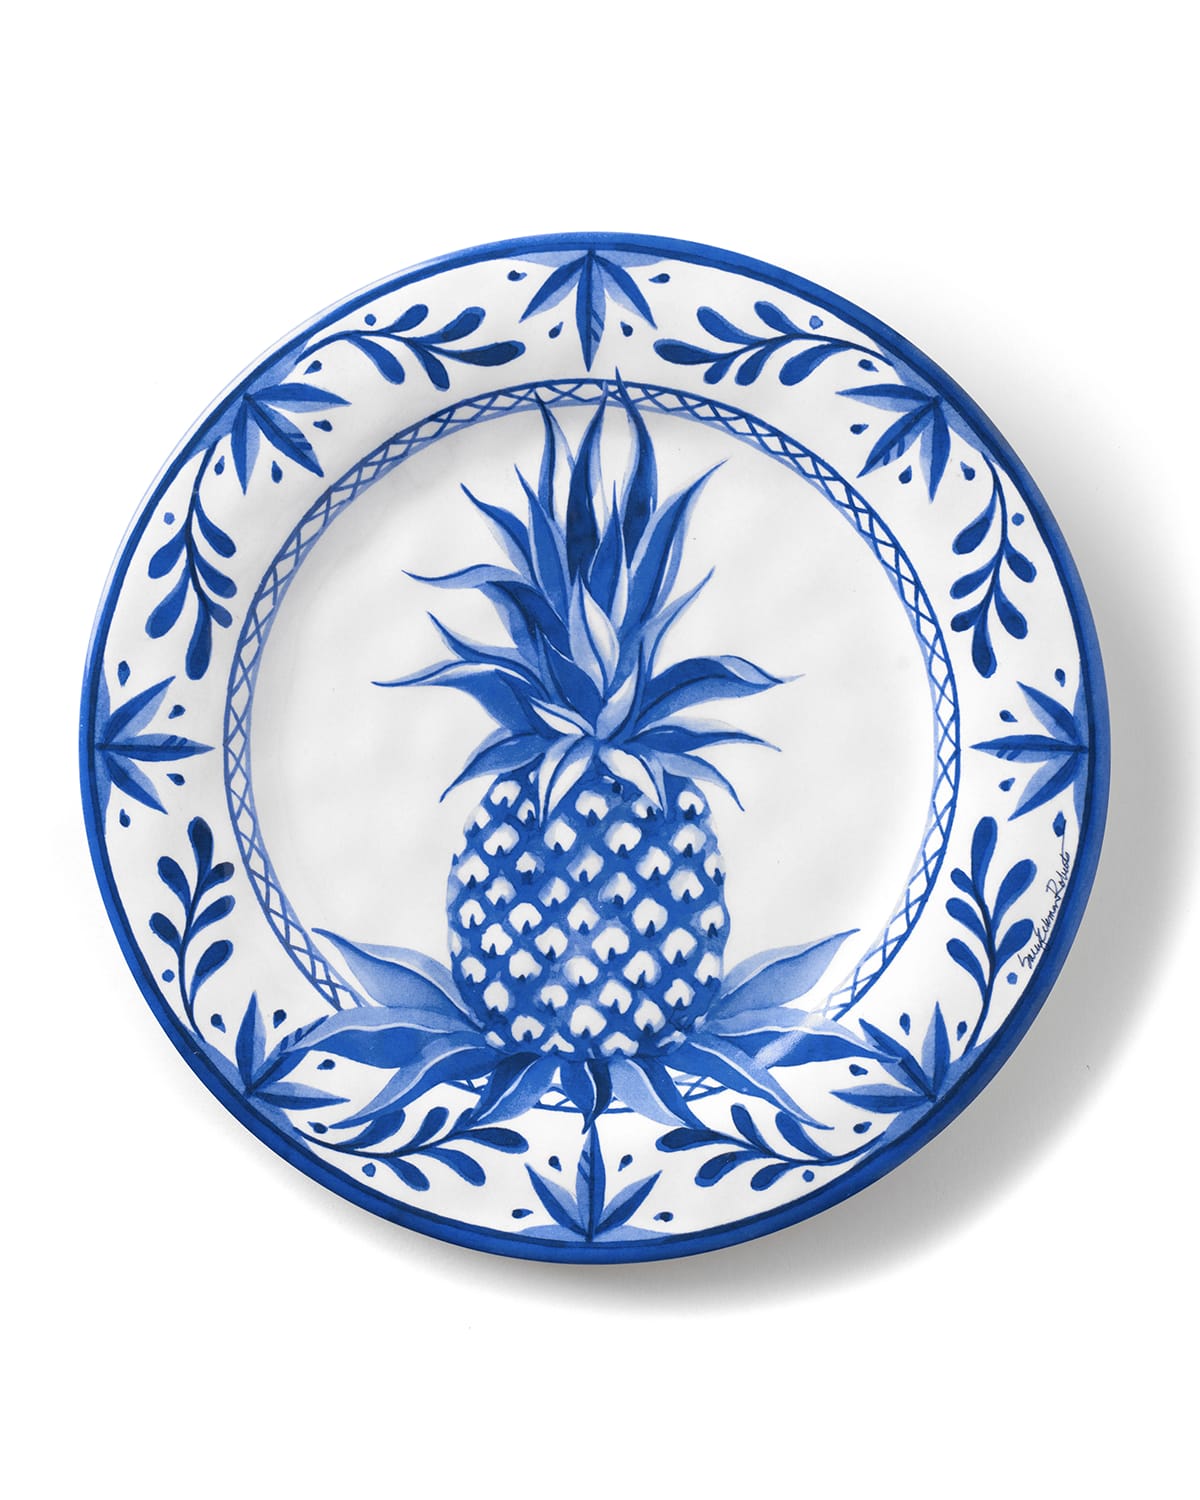 Shop Bamboo Table Blue Pineapple Shatter-resistant Bamboo Dinner Plates, Set Of 4